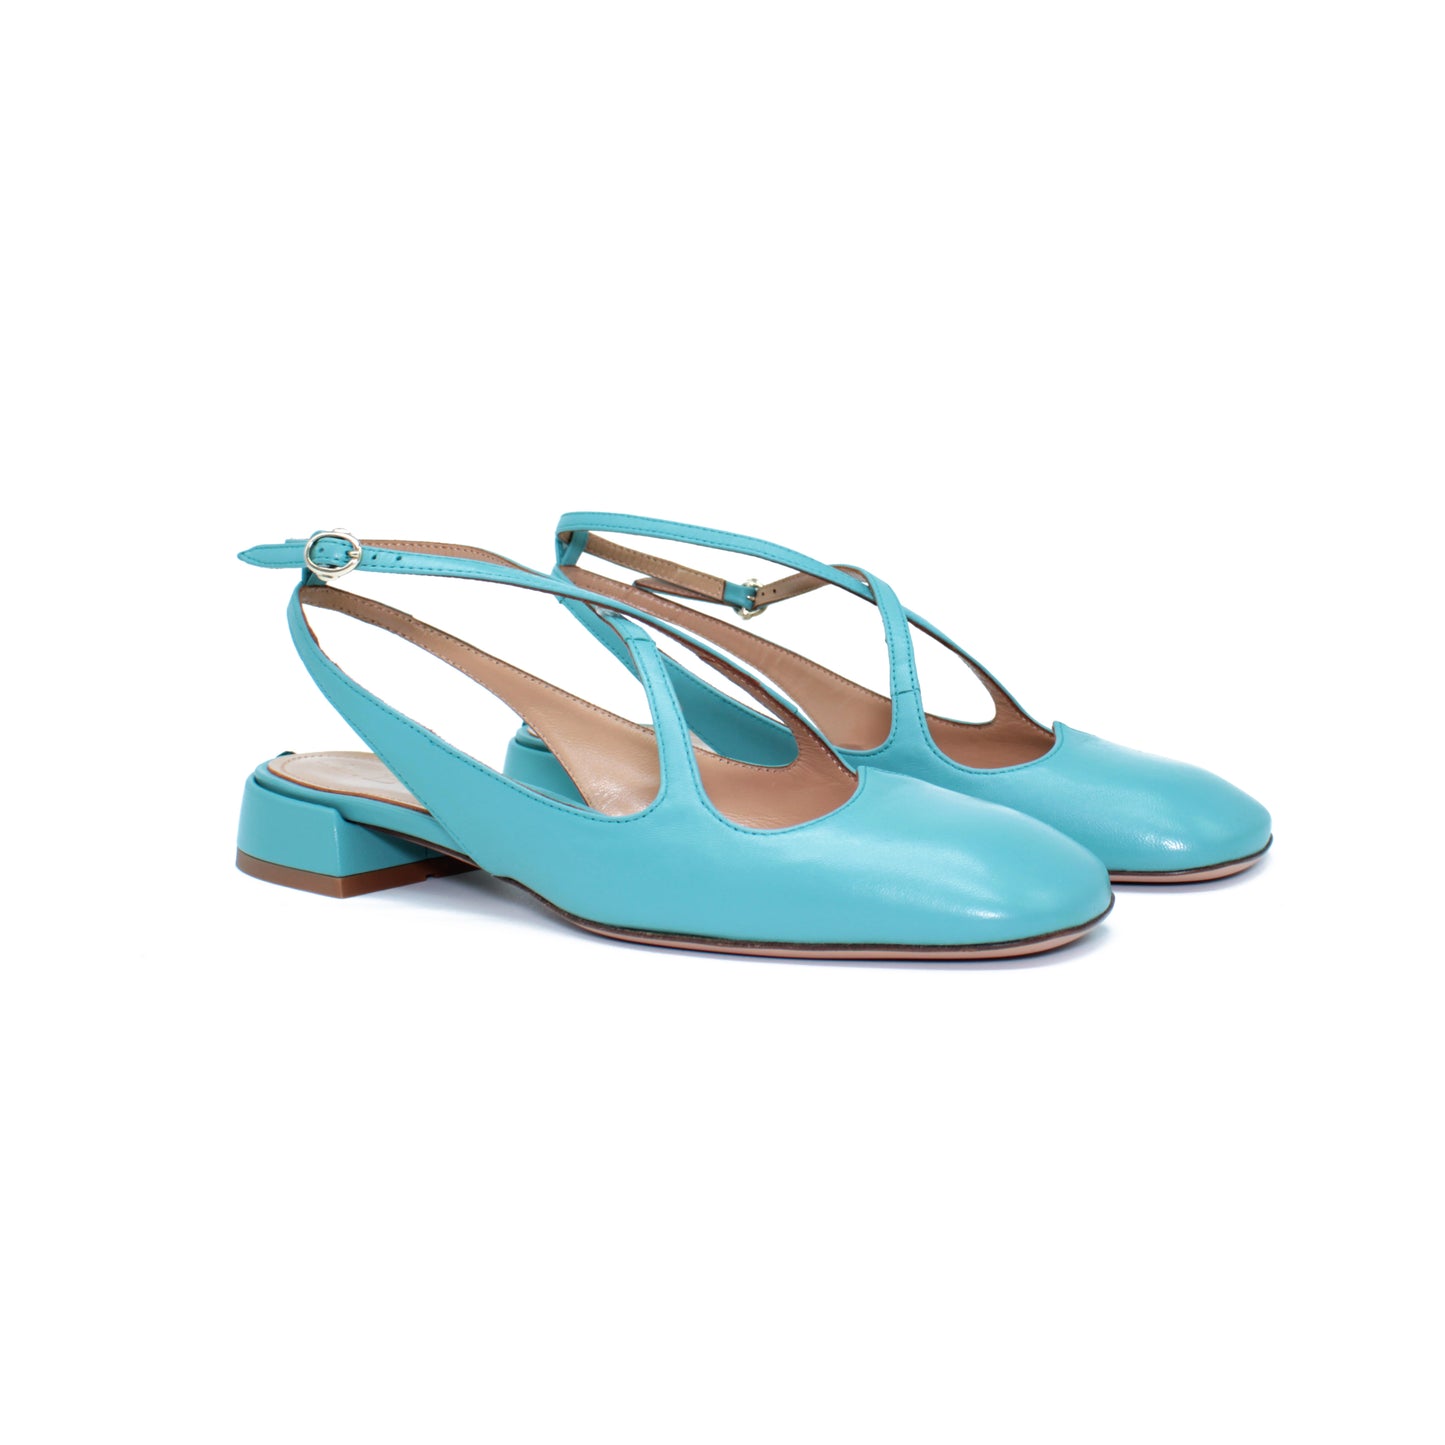 Sling Back Two for Love in turquoise nappa leather